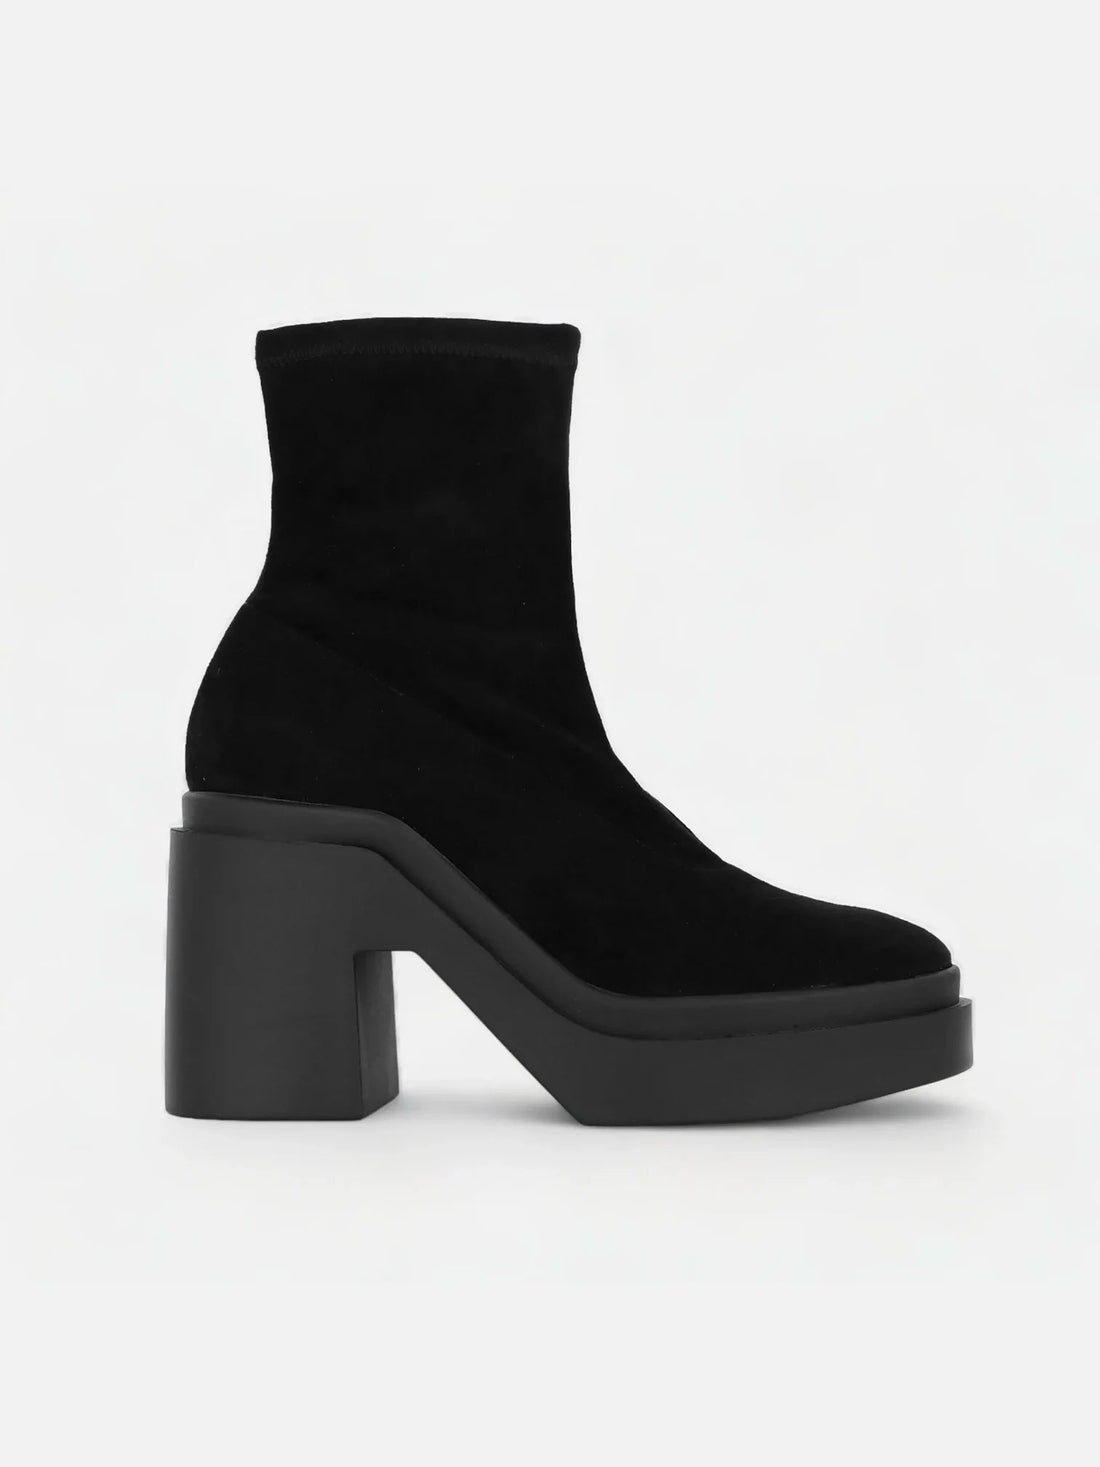 ANKLE BOOTS - NINA ankle boots, suede leather black - 3606063819381 - Clergerie Paris - Europe